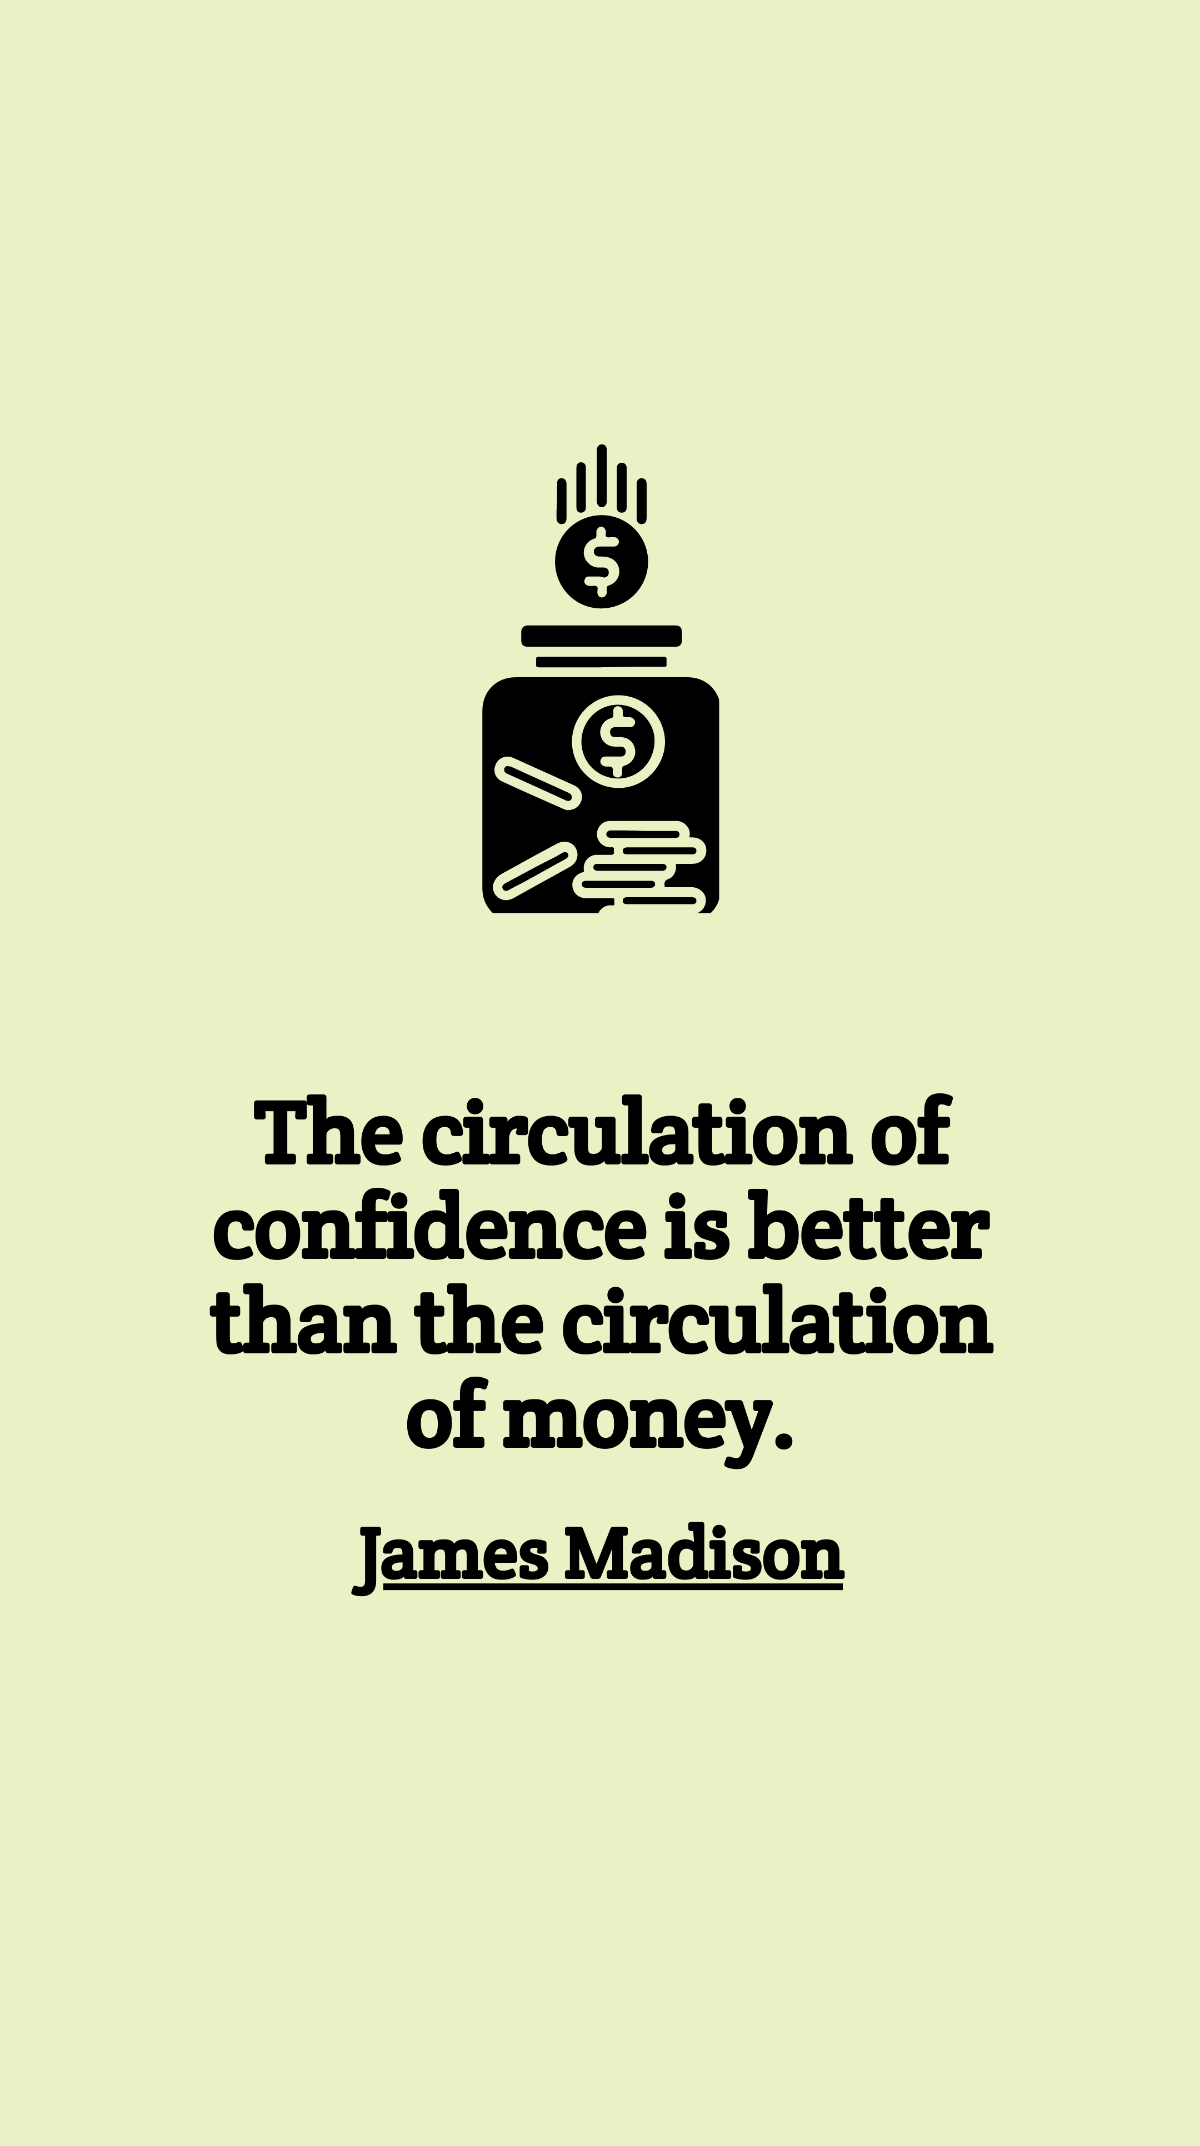 James Madison - The circulation of confidence is better than the circulation of money. Template